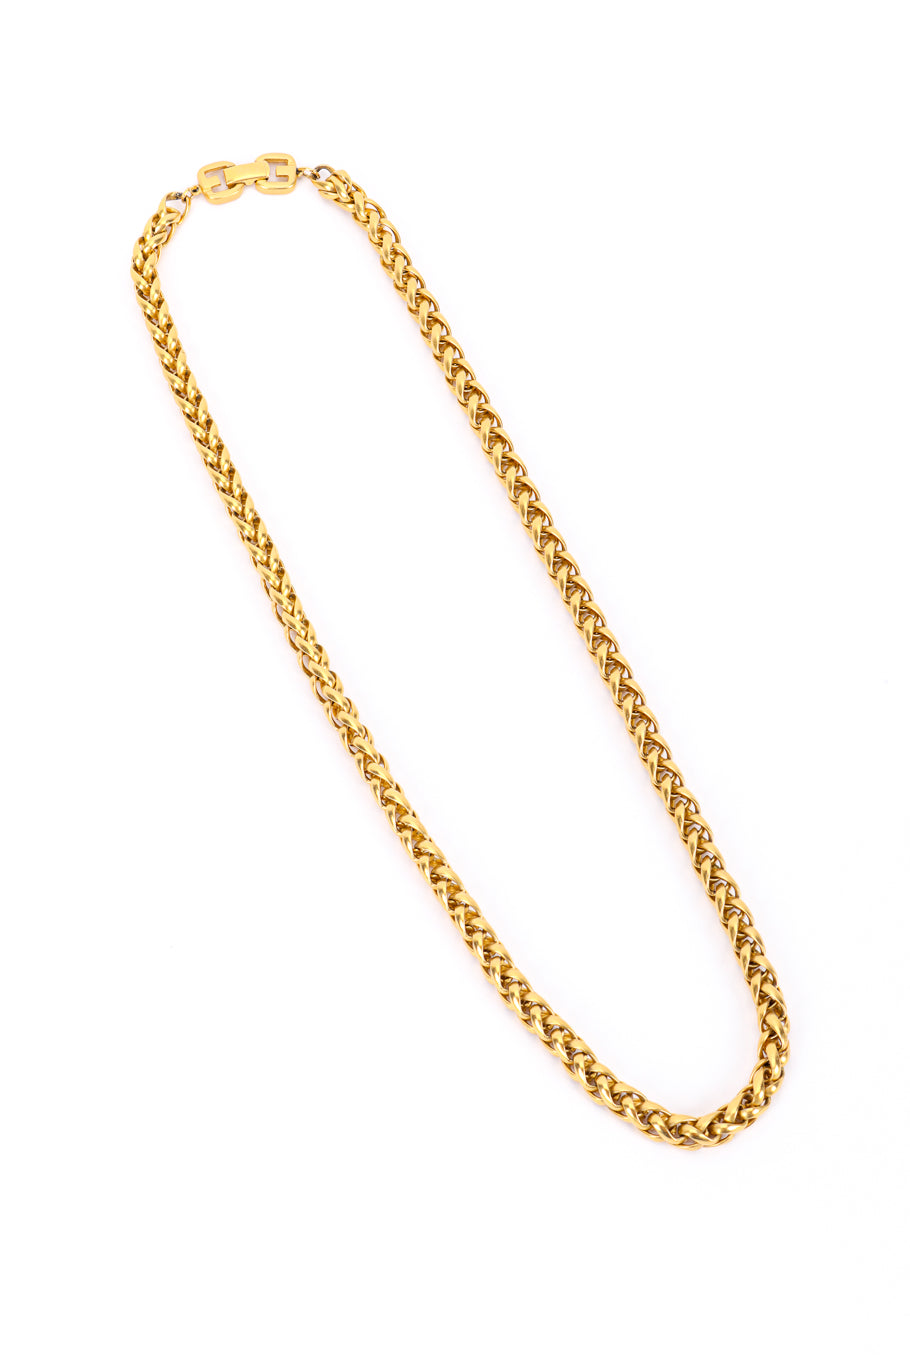 Vintage Givenchy Wheat Chain Necklace front @recessla